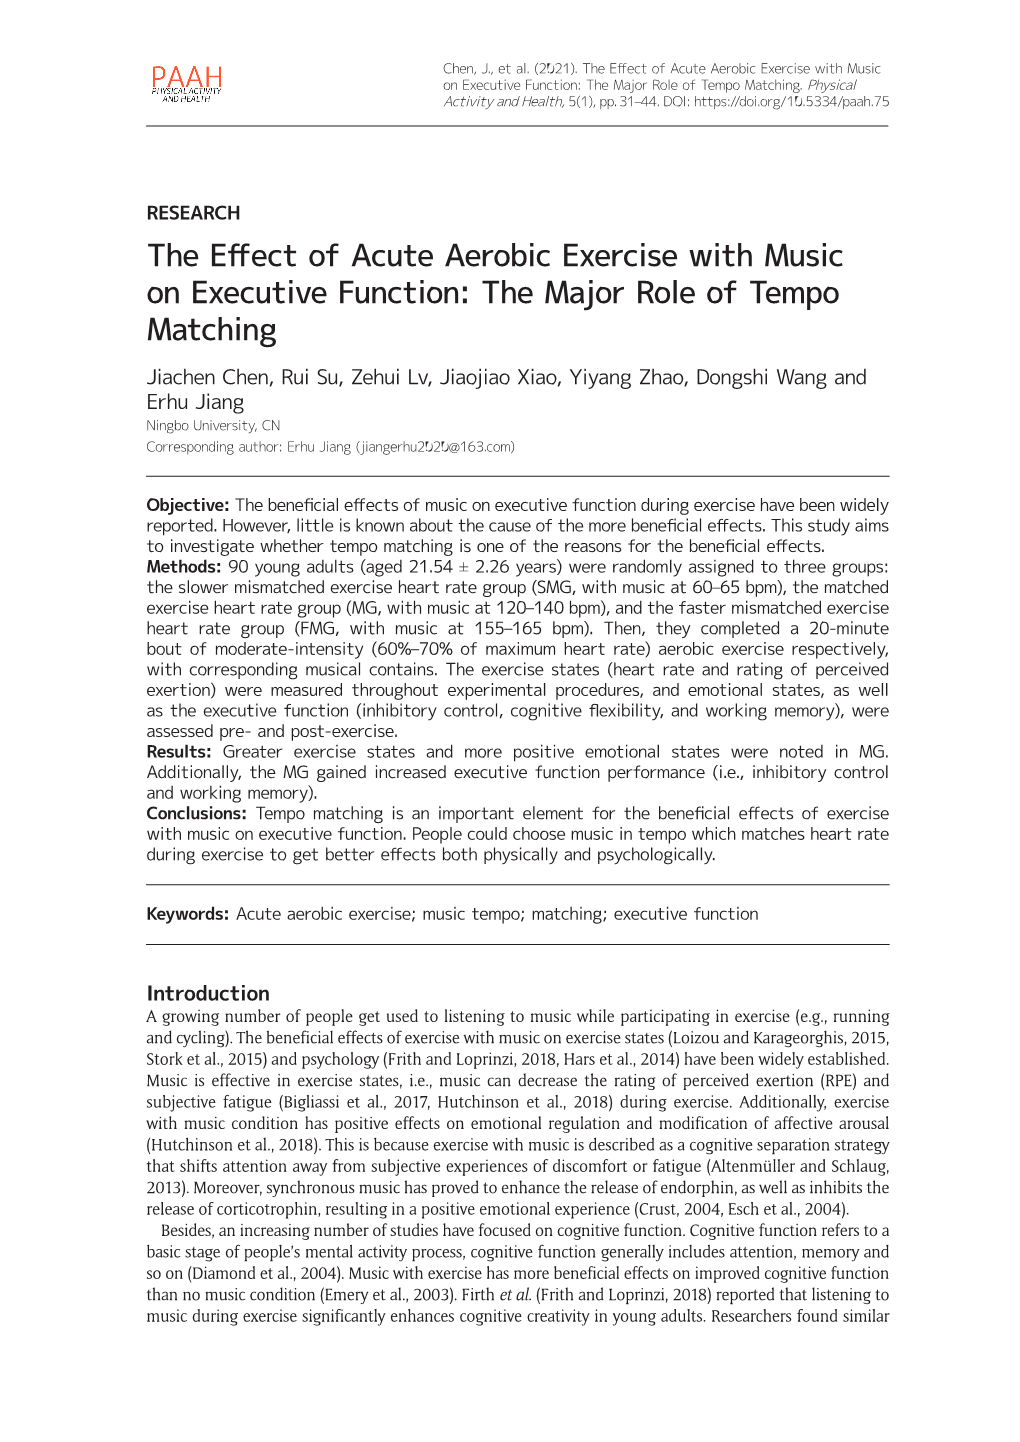 The Effect of Acute Aerobic Exercise with Music on Executive Function: the Major Role of Tempo Matching